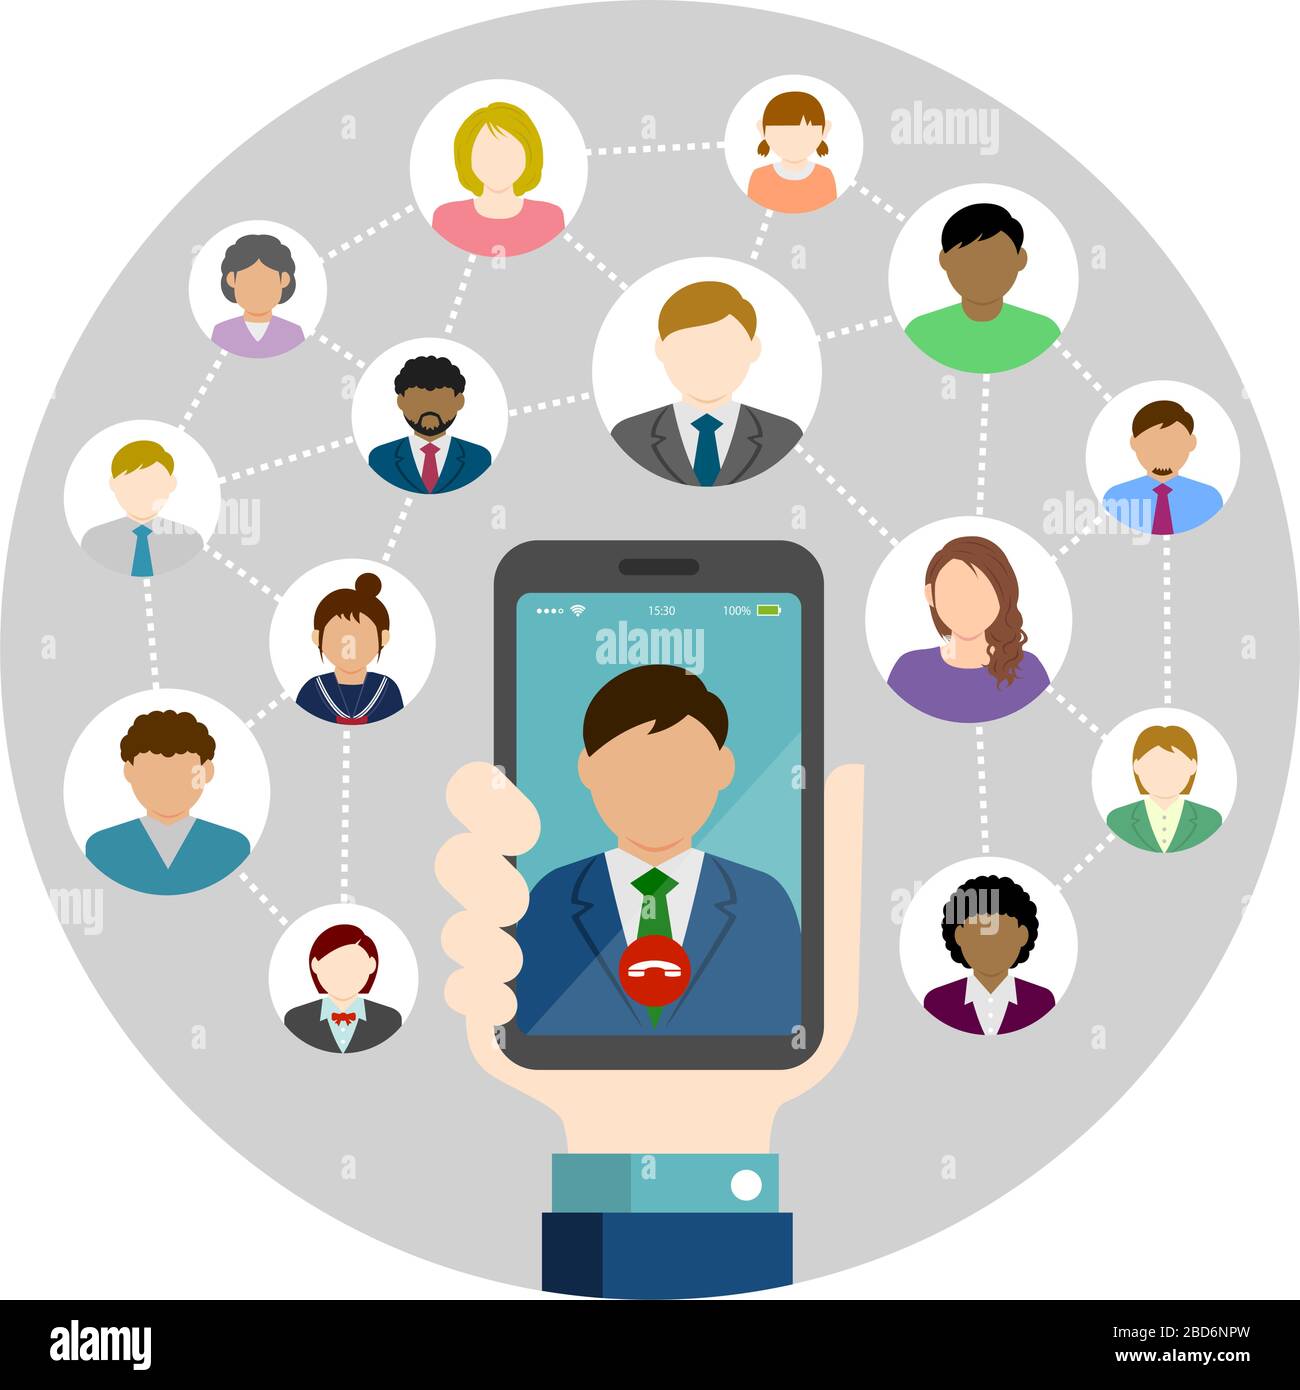 Video call / Global communiation through mobile phone circle vector banner illustration / Hand holding smartphone. Stock Vector